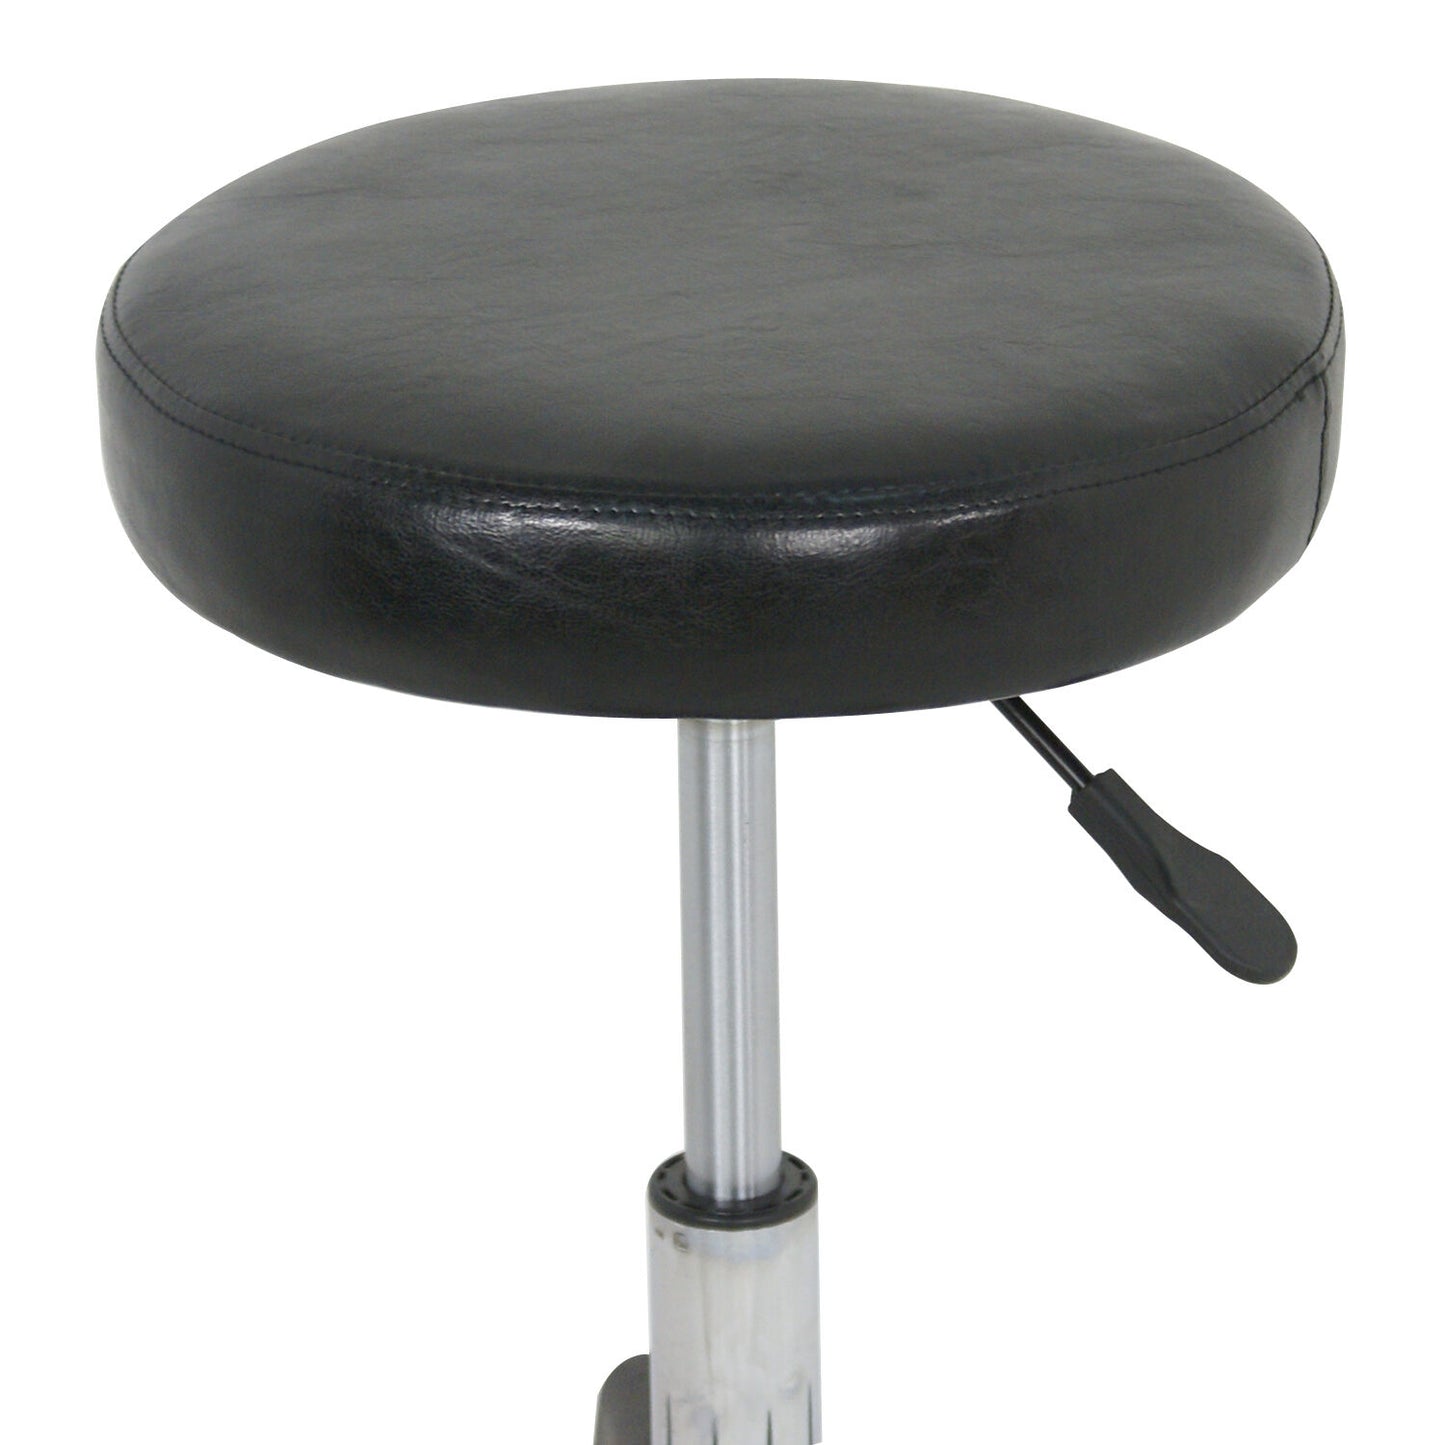 Set of 2 Black Leather Swivel Round Adjustable Barstools Chairs Counter Stools